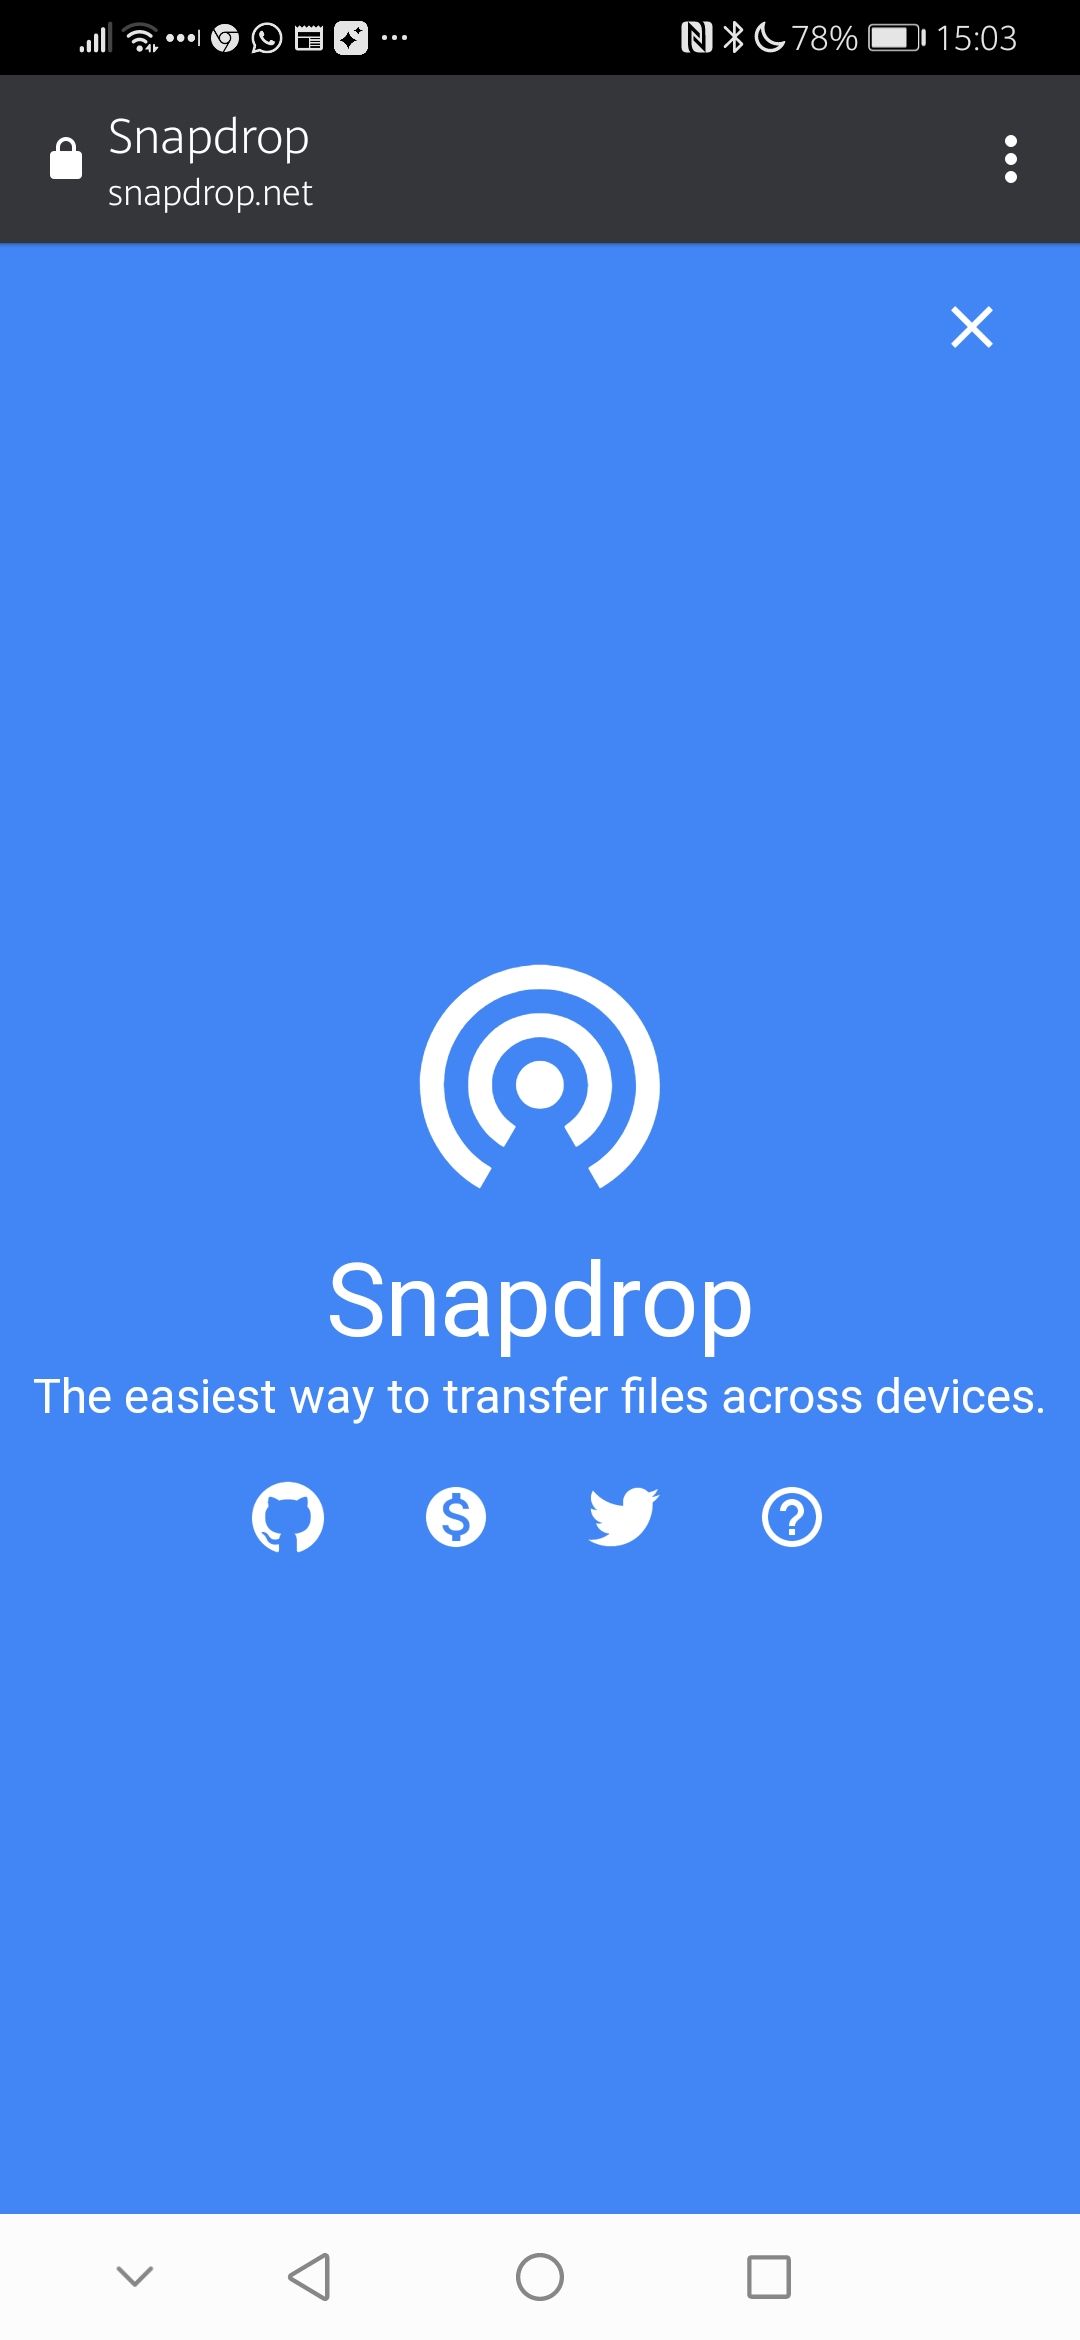 Snapdrop for Android about page